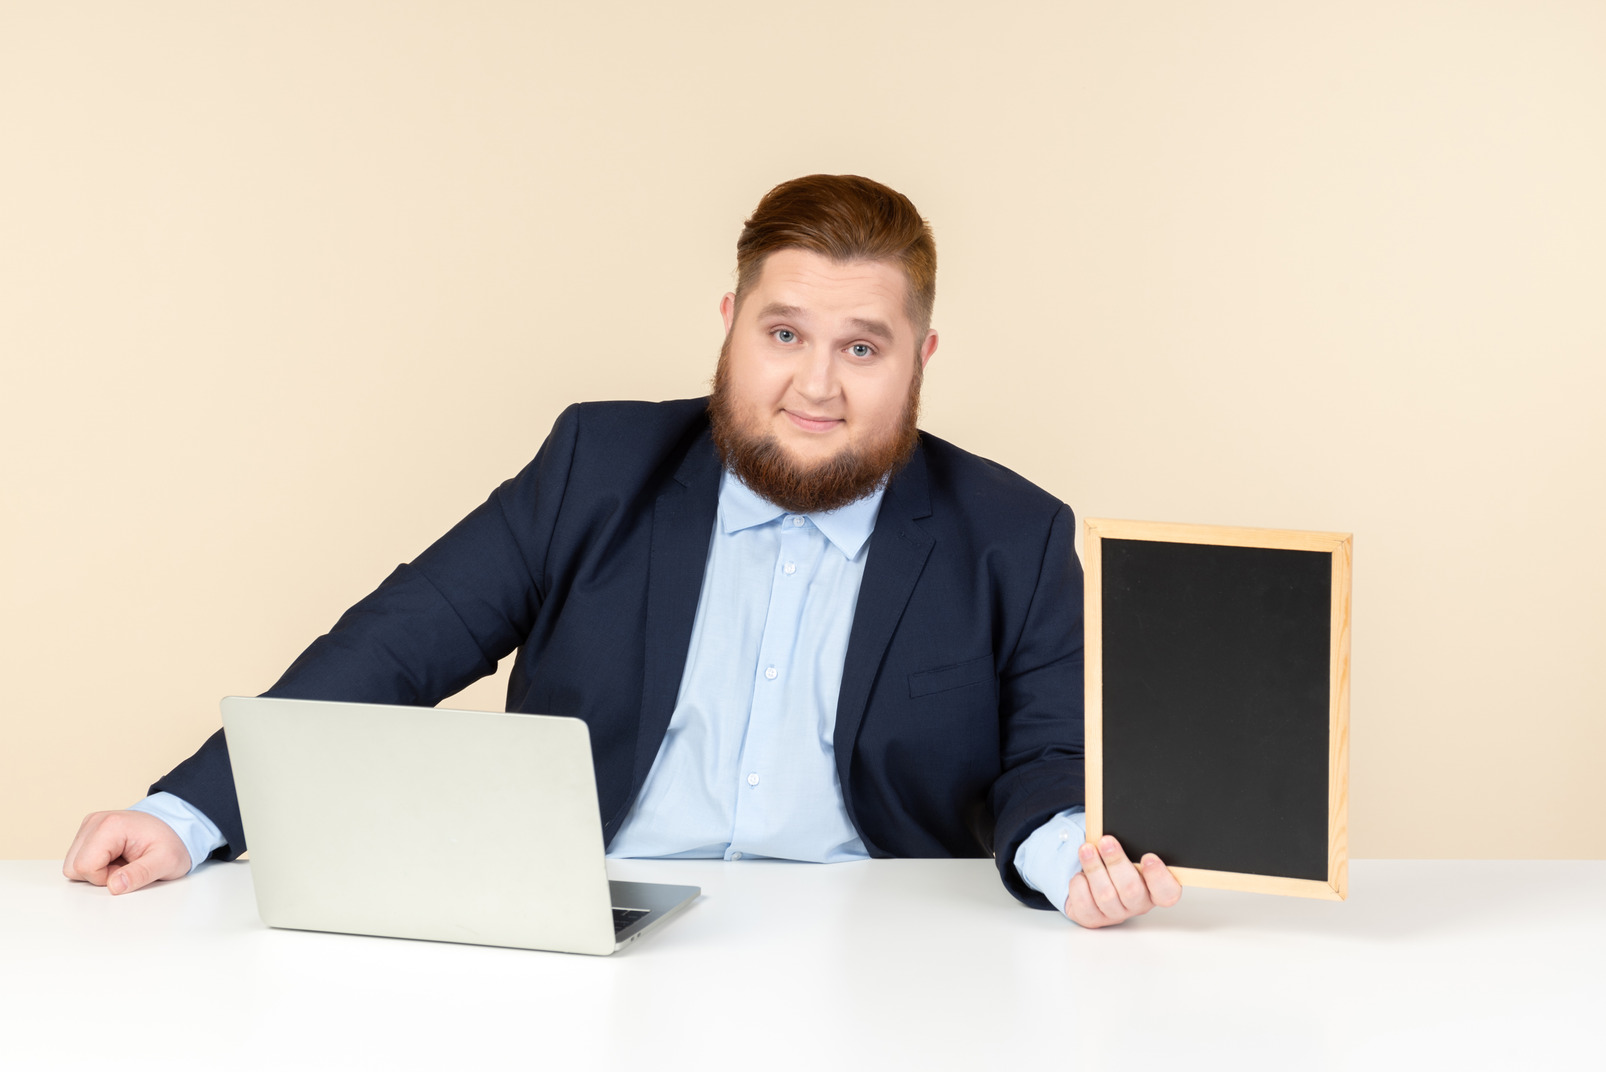 Young overweight man sitting in front of laptop and holding small blackboard